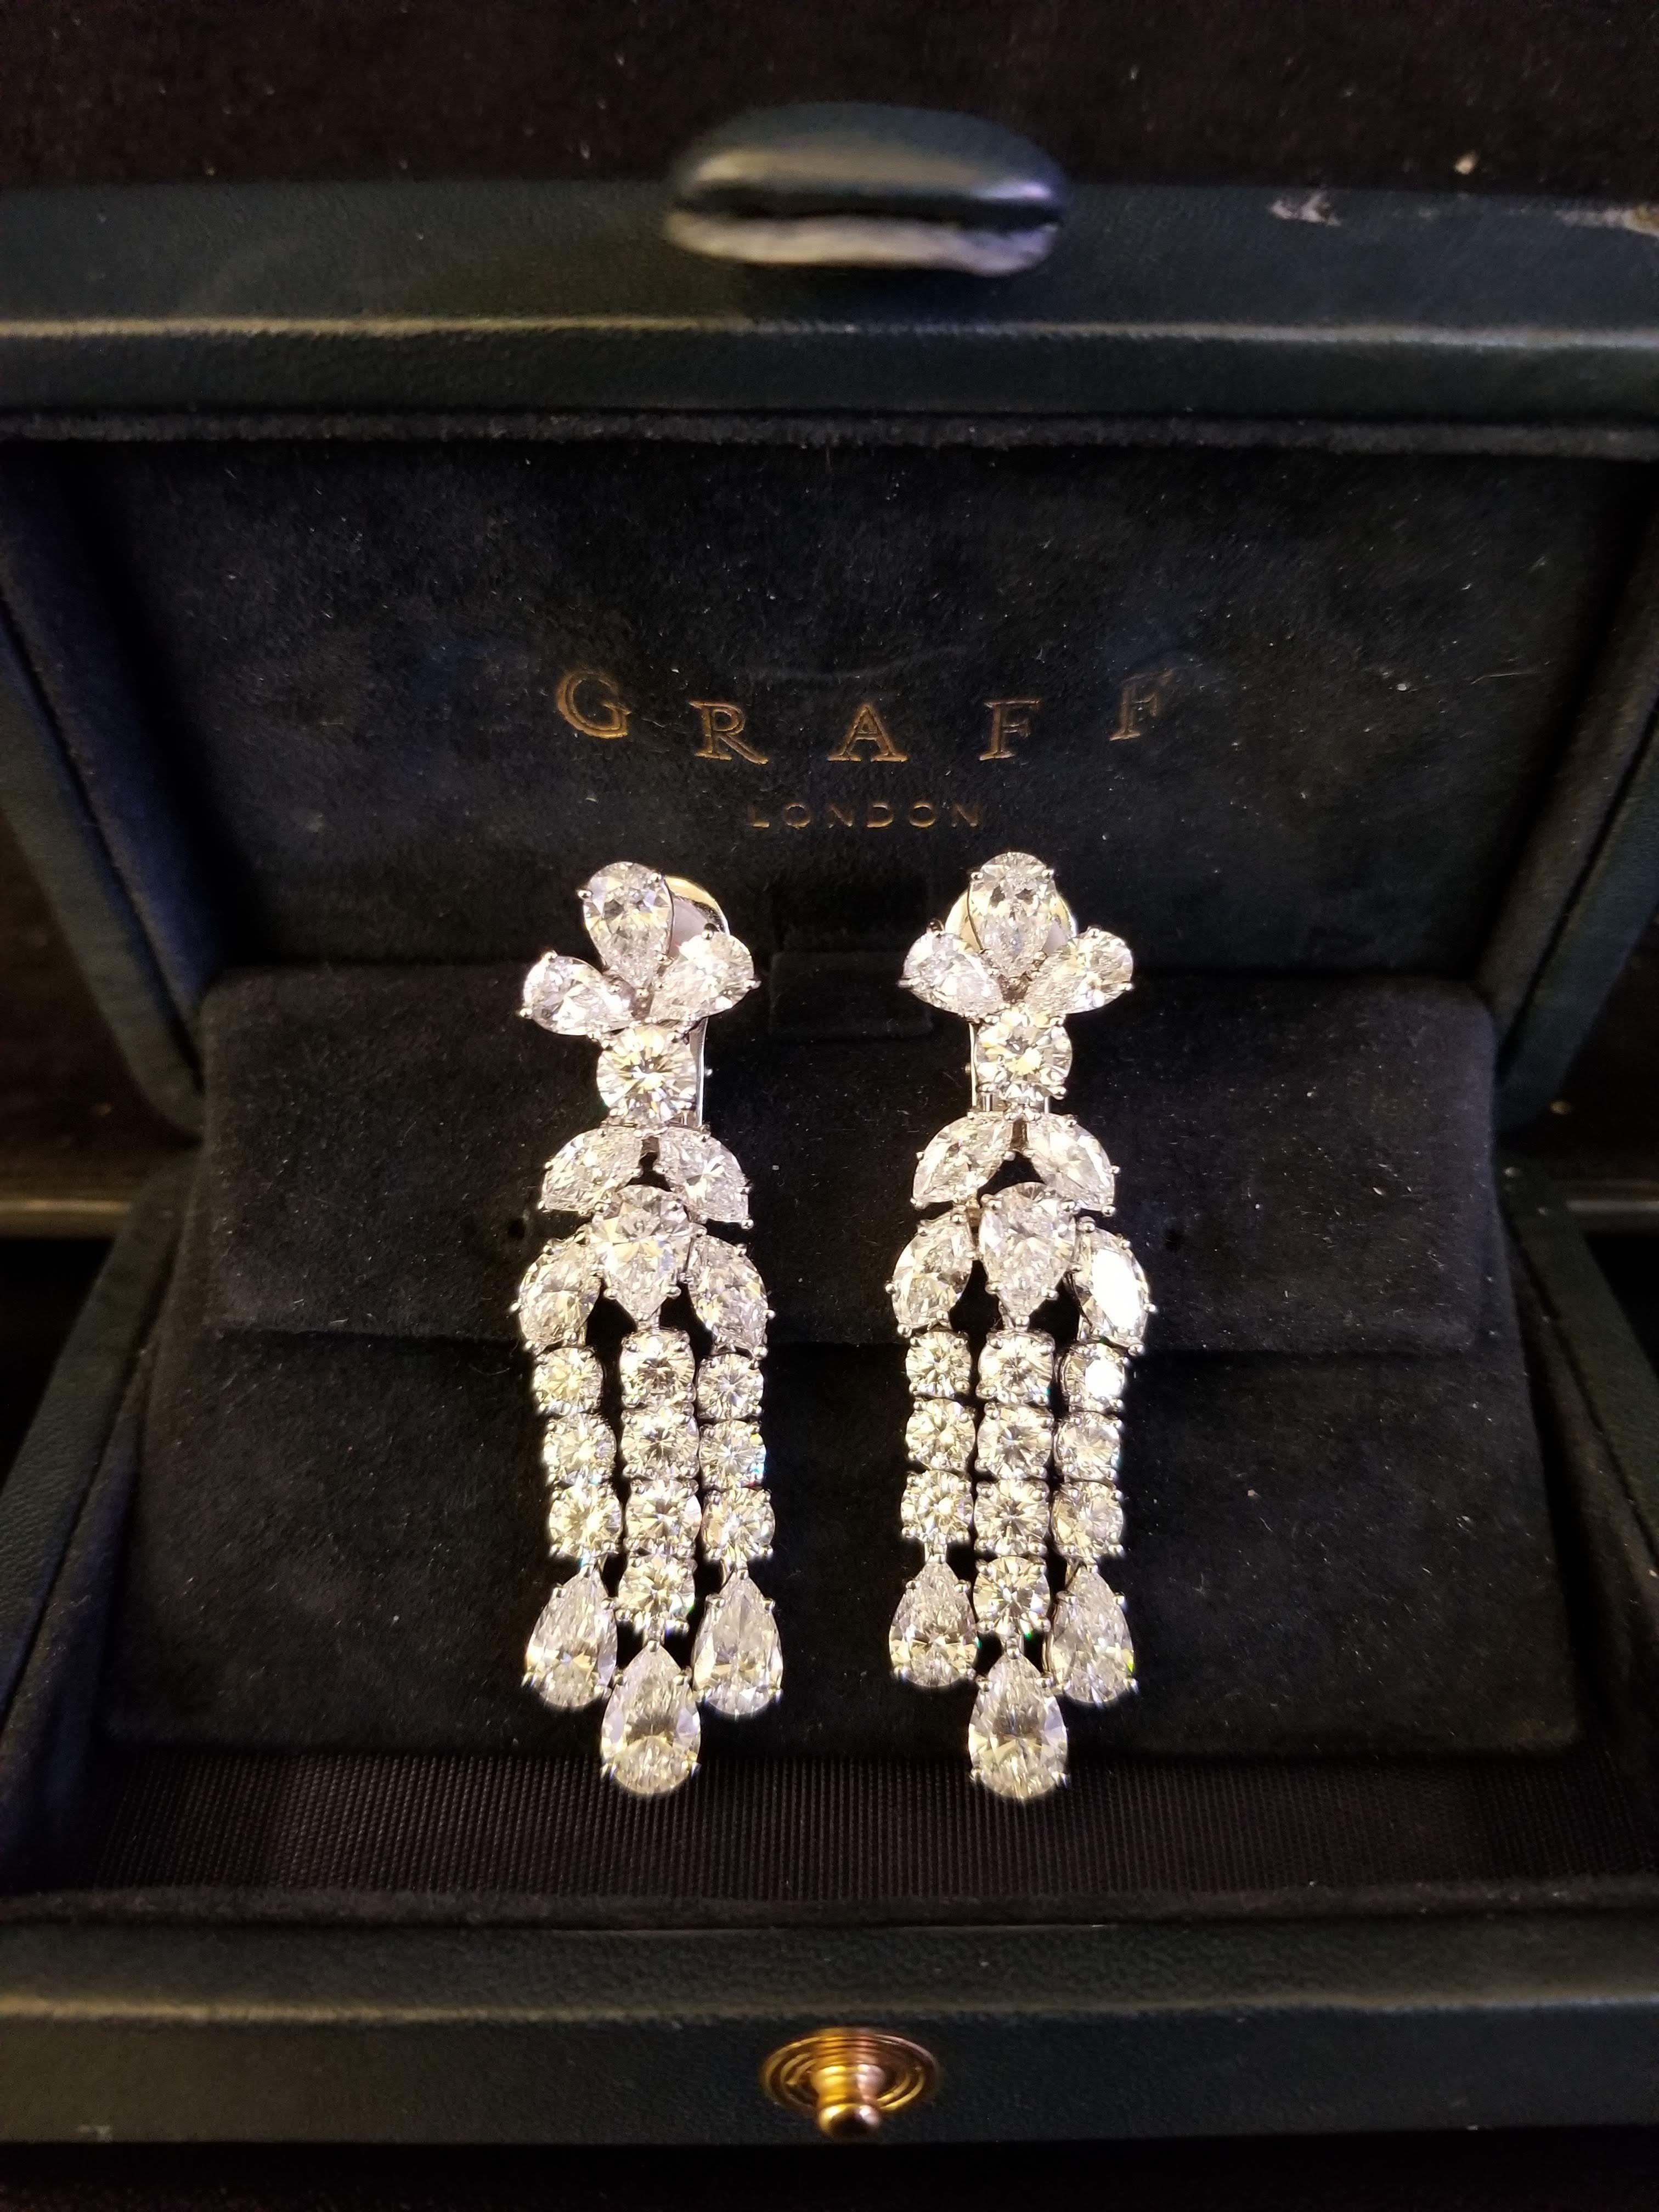 Diamond Waterfall Earrings by GRAFF
This pair of earrings has 14 pear shaped diamonds weighing 11.03 tcw , 8 marquise cut diamonds weighing 4.17tcw, and 22 round diamonds weighing 7.68tcw. The diamonds are colorless and VS+ clarity. Signed Graff and